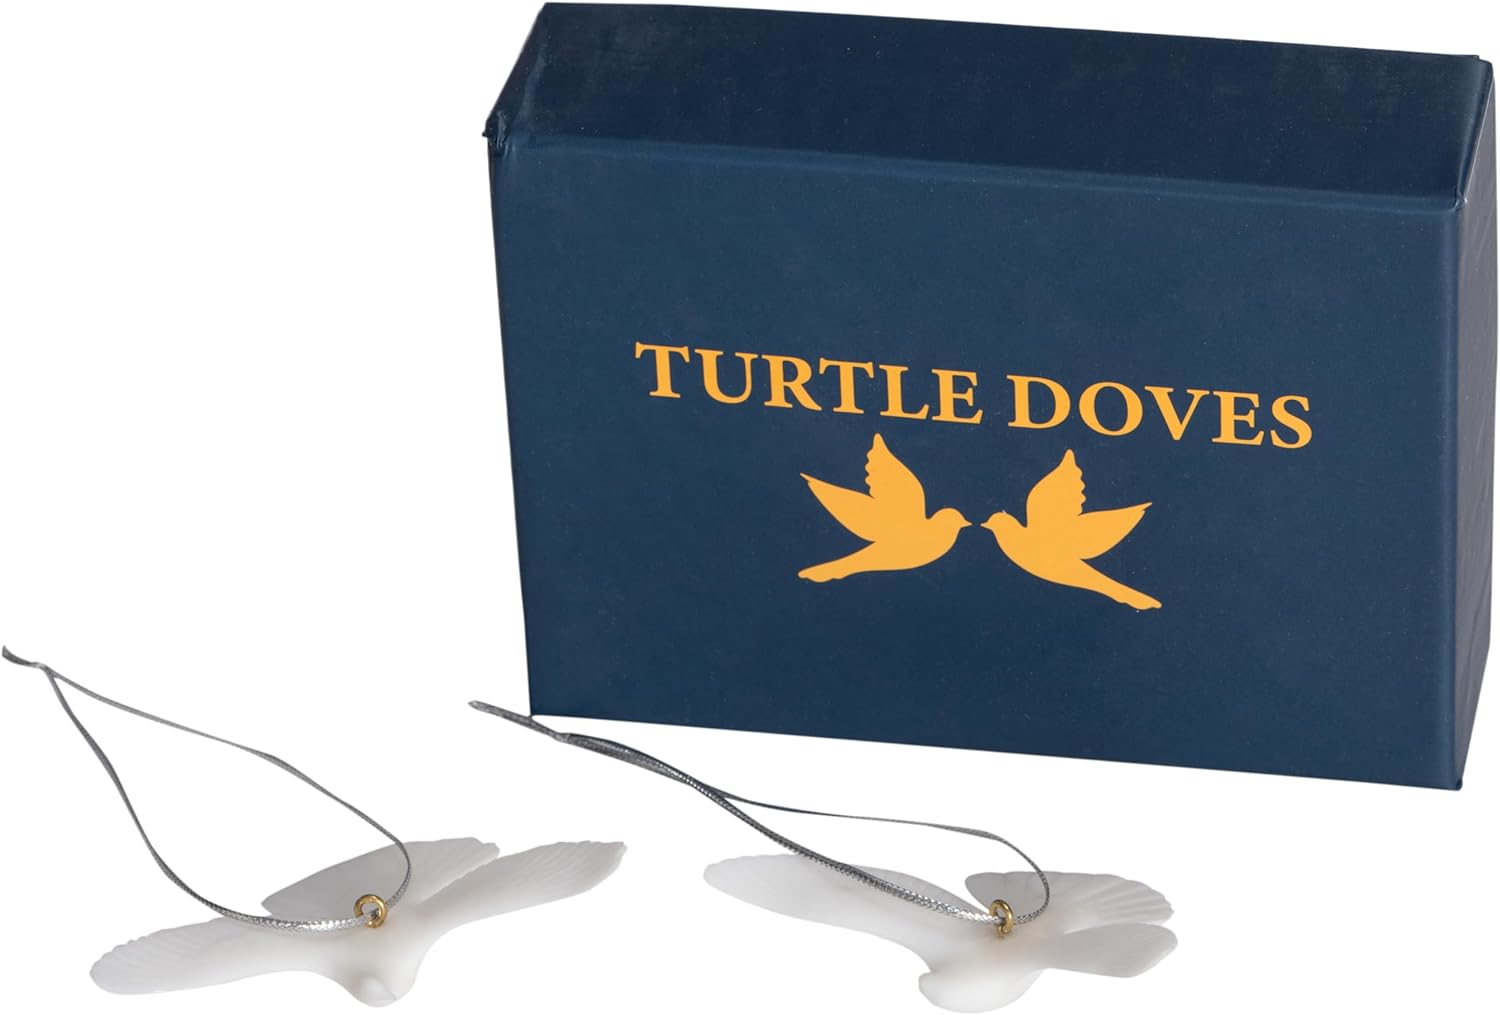 Turtle Dove Gift Box Two Pack Set